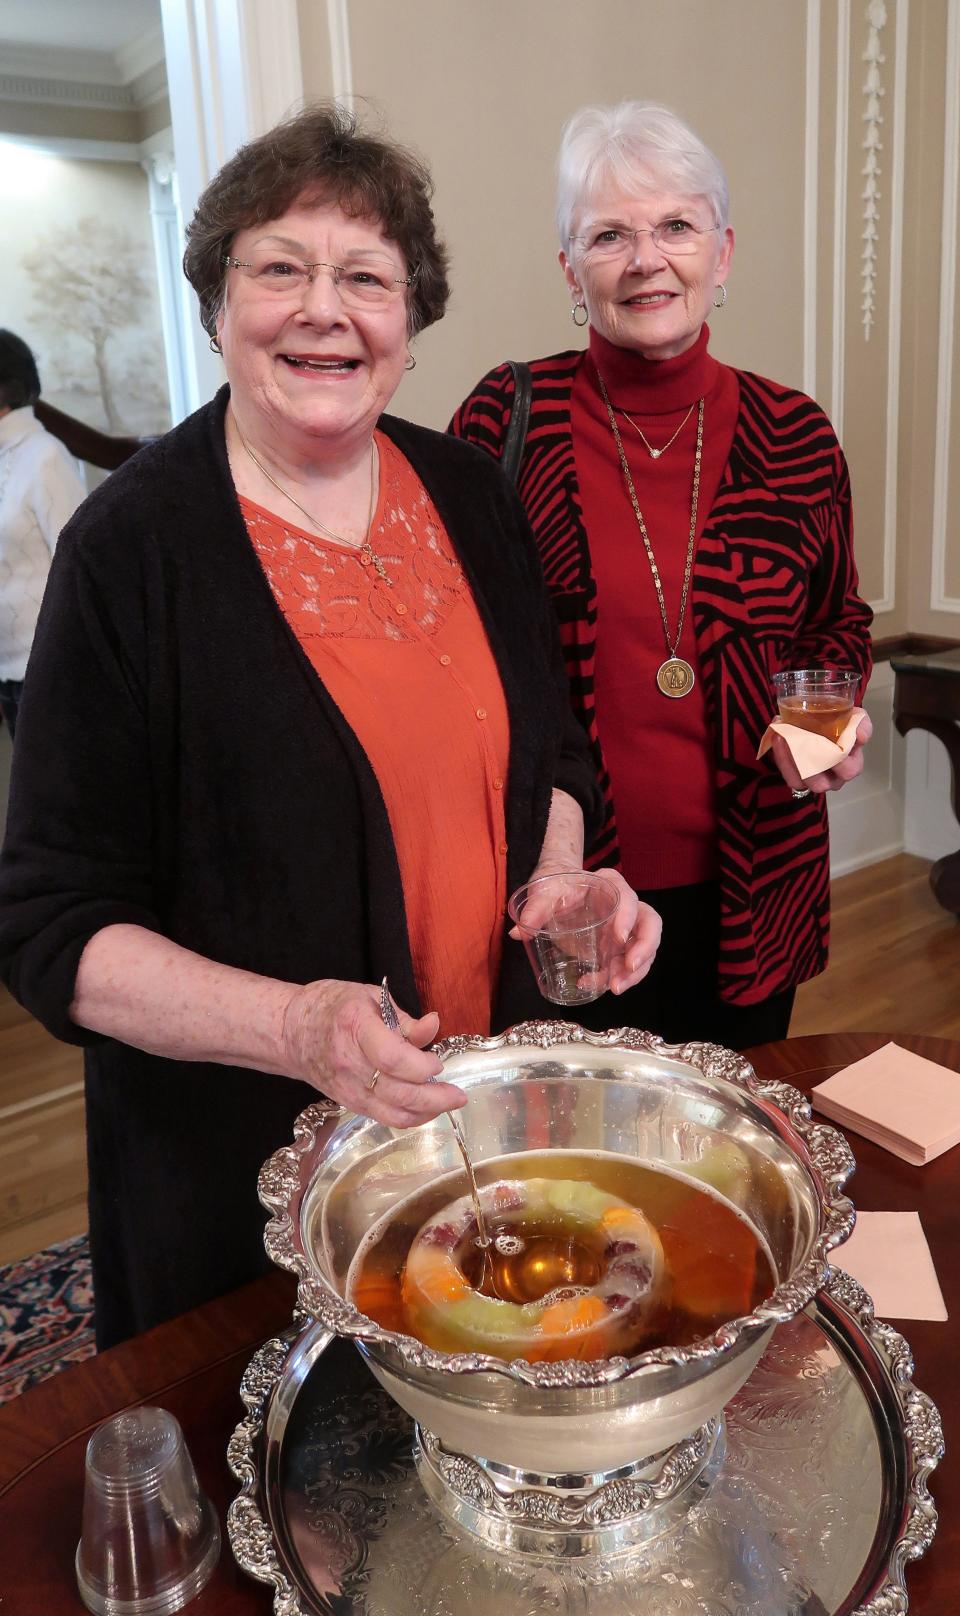 Susan Blackmon and Nelda McClure served guests during a reception at the conclusion of an organ concert held at the First Presbyterian Church, 1573 North Highland, in Jackson, Tennessee on Sunday, February 5, 2023. The concert, featuring music by internationally recognized organist Jonathan Dimmock, was held to kick off the Bicentennial year celebration for the church which was founded on September 25, 1823. A reception was held in Memorial Hall to honor Mr. Dimmick after the concert.